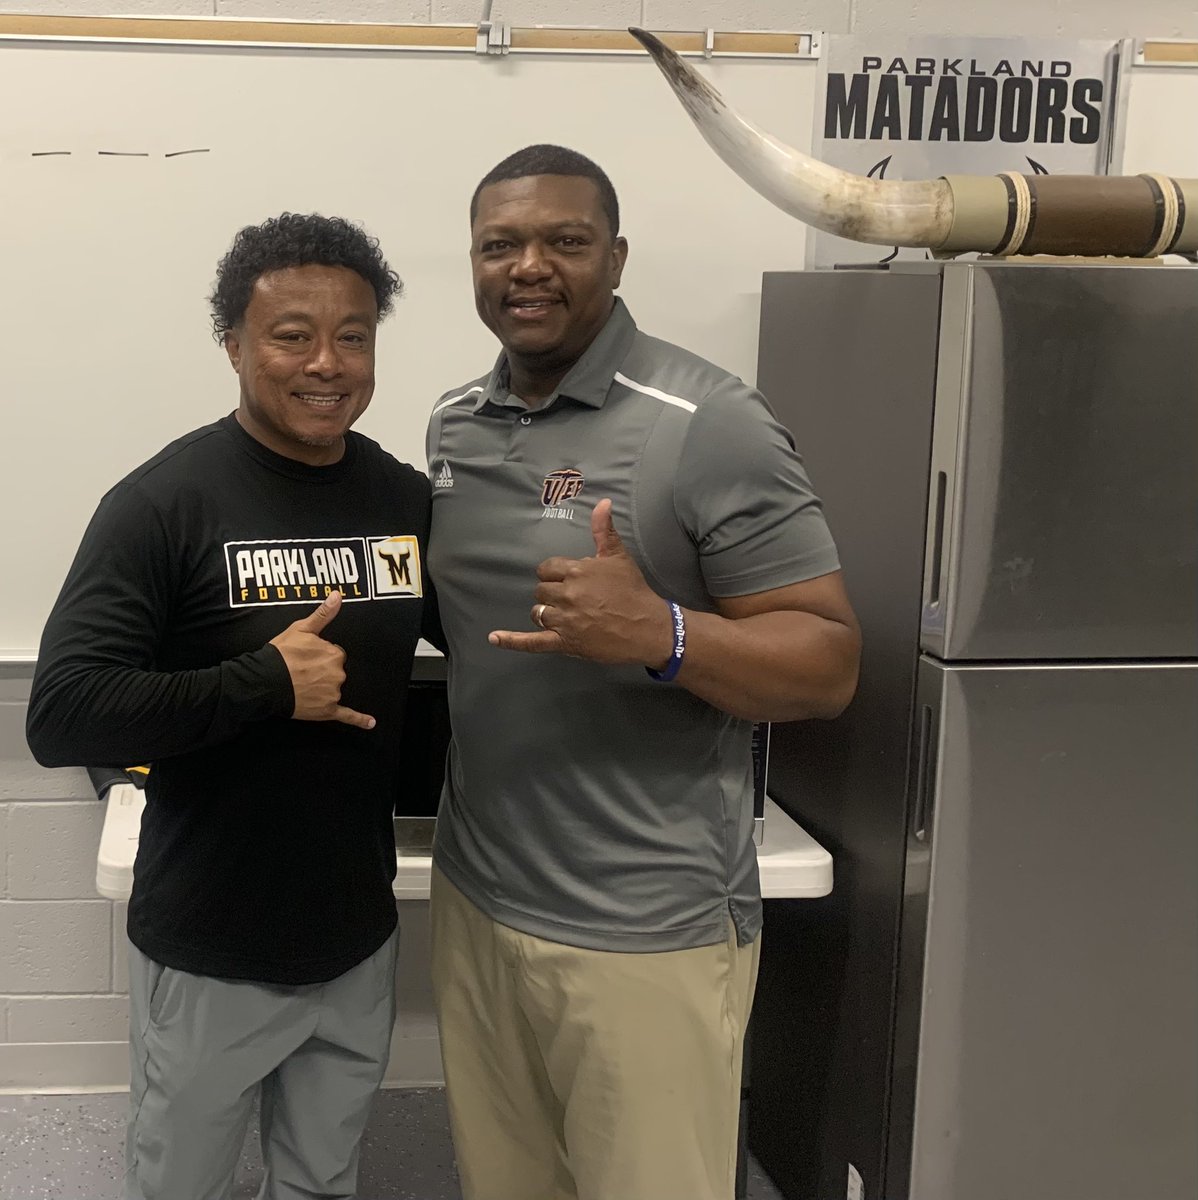 Great talking to @leighadrian @PHSMatadorFB appreciate the hospitality!!!! 🟠🔵 #WinTheWest #PicksUp ⛏️🤙🏾